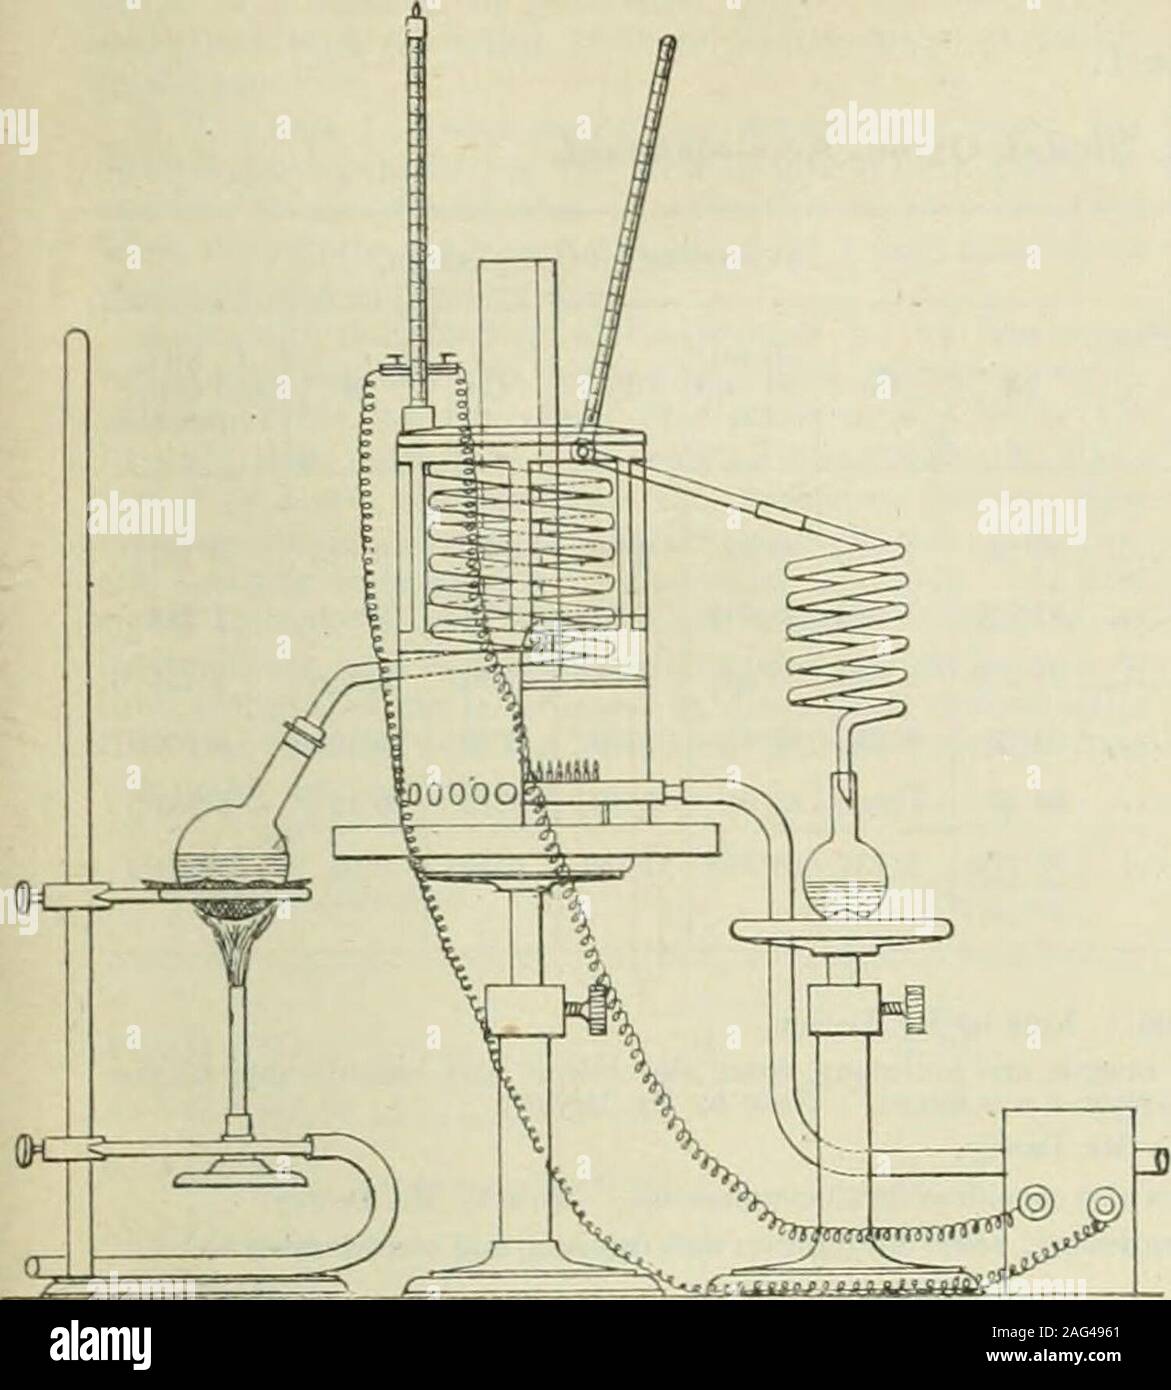 . Journal. ctional Distillation. M.Chem. Zeit. 16, 958—959. Ekenberg The author has devised an apparatus for the fractionaldistillation of liquids boiling between 100° and 250°. Theconstruction of the apparatus will be understood from theFigure on next page. The fractionation column, 900 mm. in length and 4—5 nun.in diameter, is contained iu a closed air-bath and is coiledround the glass cylinder which serves as a chimney. Thetemperature of the bath is regulated by a Stuhls contactthermometer connected with an electrical thermo-rcgulator.The temperature of the jacket may be controlled within0- Stock Photo